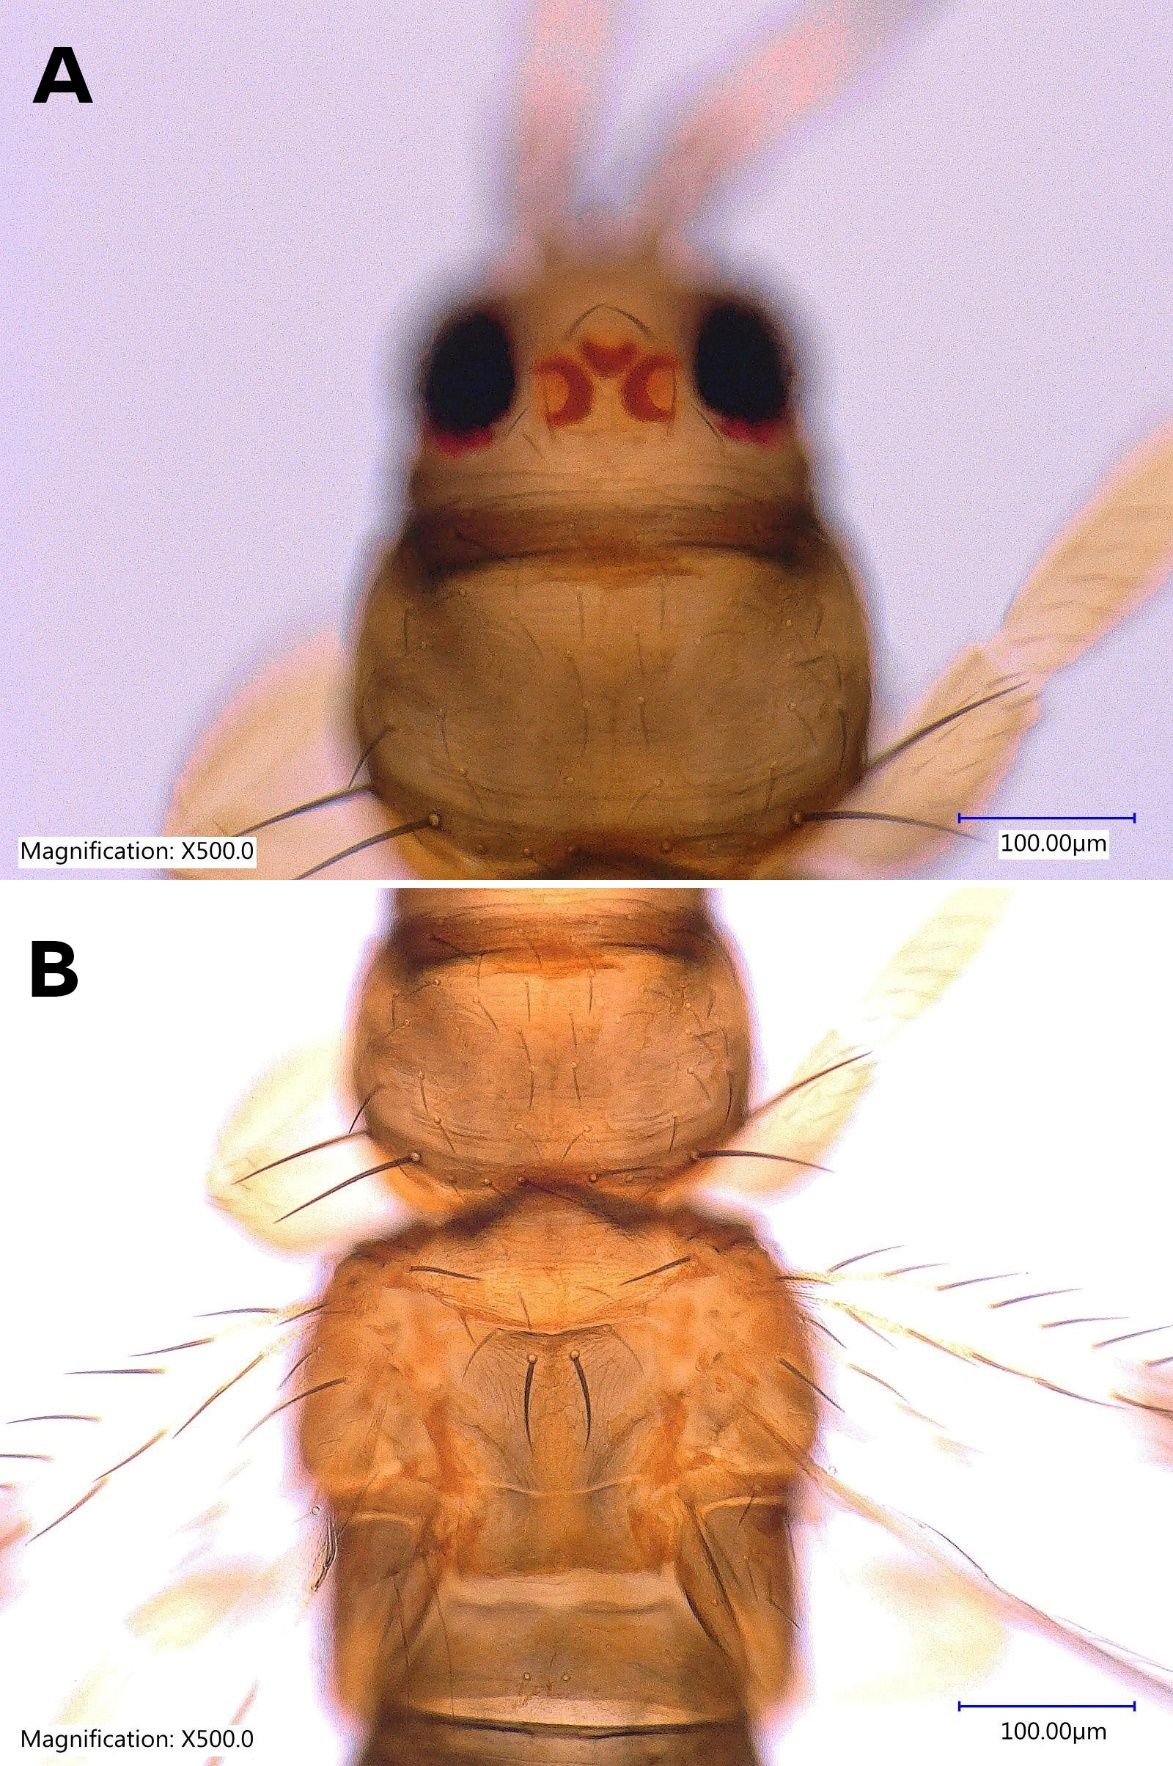 Head and prothorax of adult female Taiwanese thrips, Thrips parvispinus (Karny) (dorsal view) showing ocellus and ocellar setae (A). Thoracic segments of adult female Taiwanese thrips, Thrips parvispinus (Karny) (dorsal view) (B). 